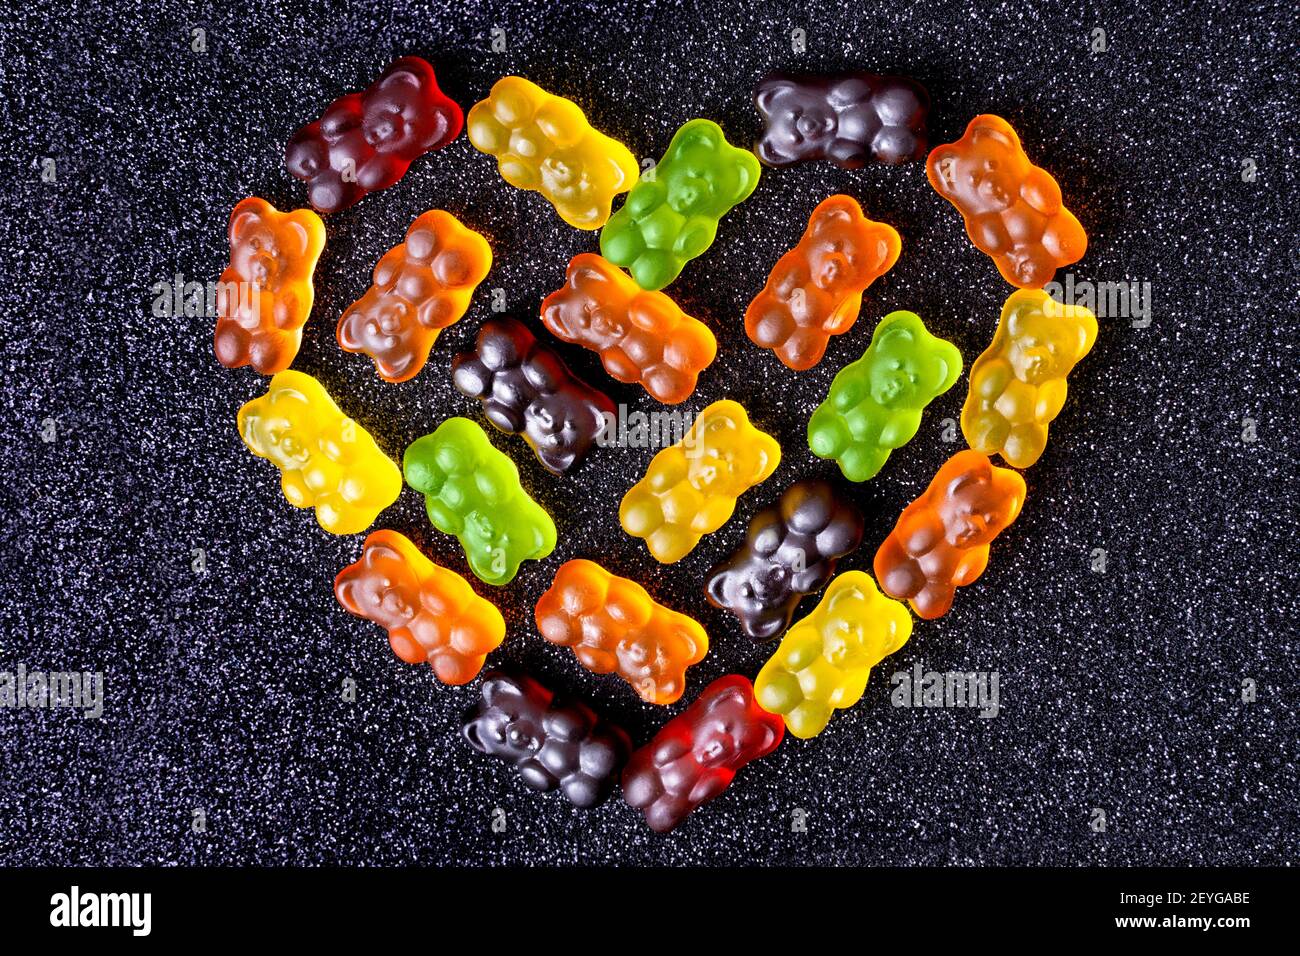 Gummy bears arranged in the shape of a heart on a sugar coated black background. Stock Photo